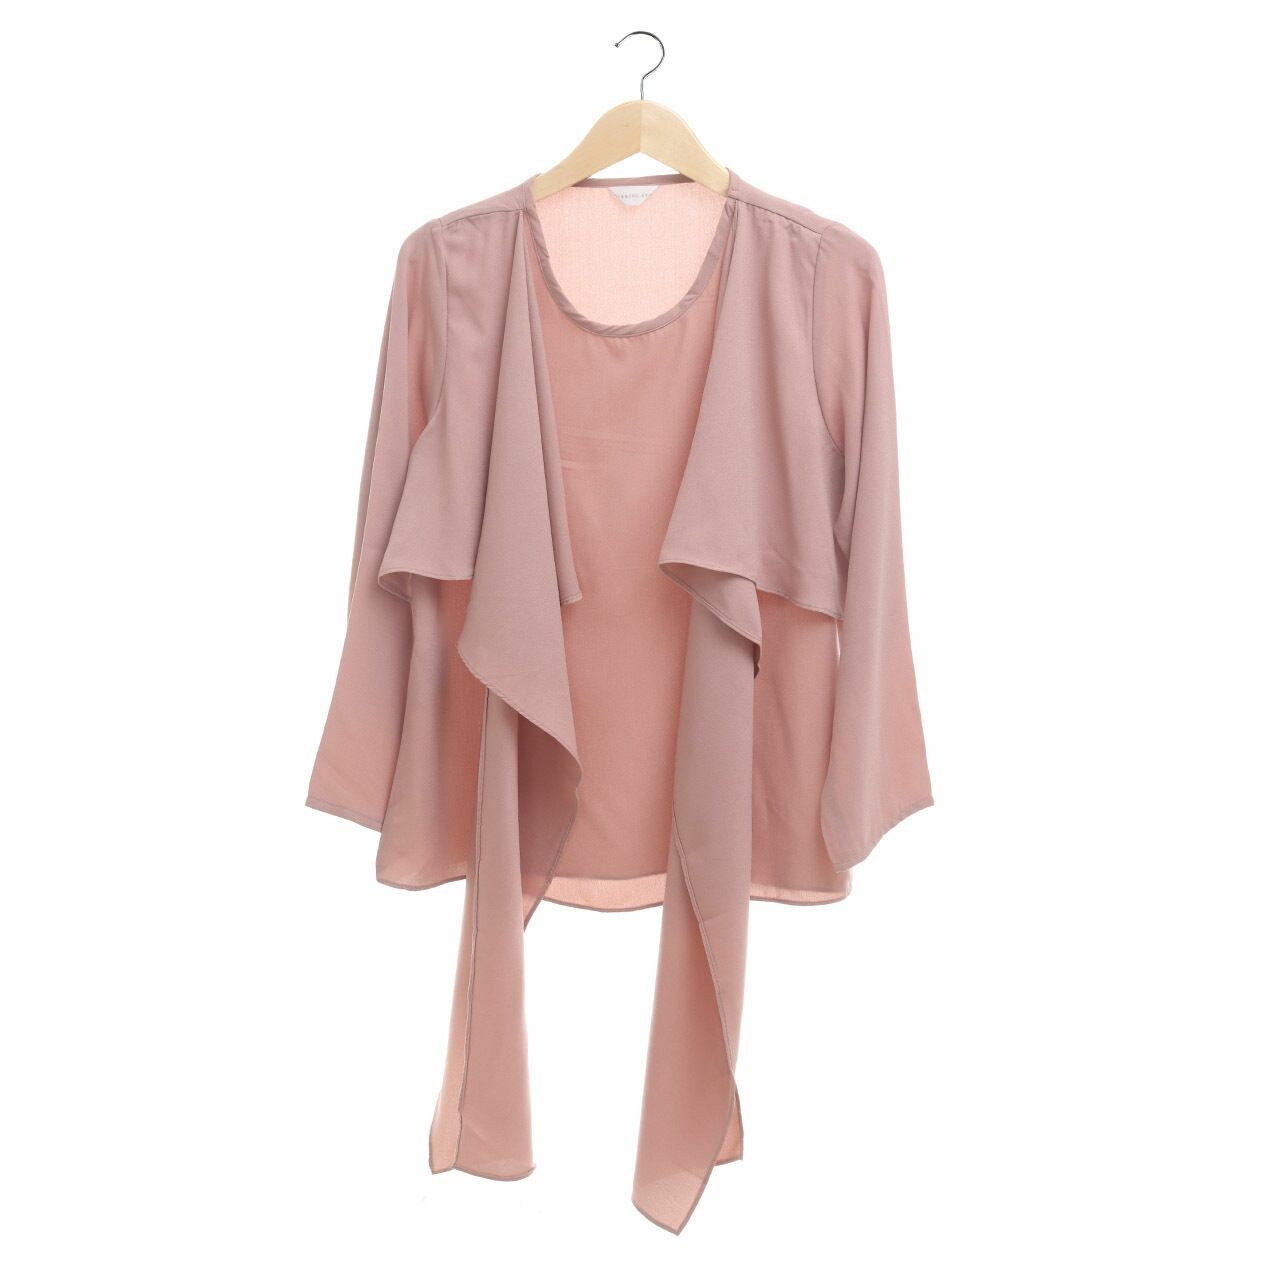 Covering Story Dusty Pink Blouse